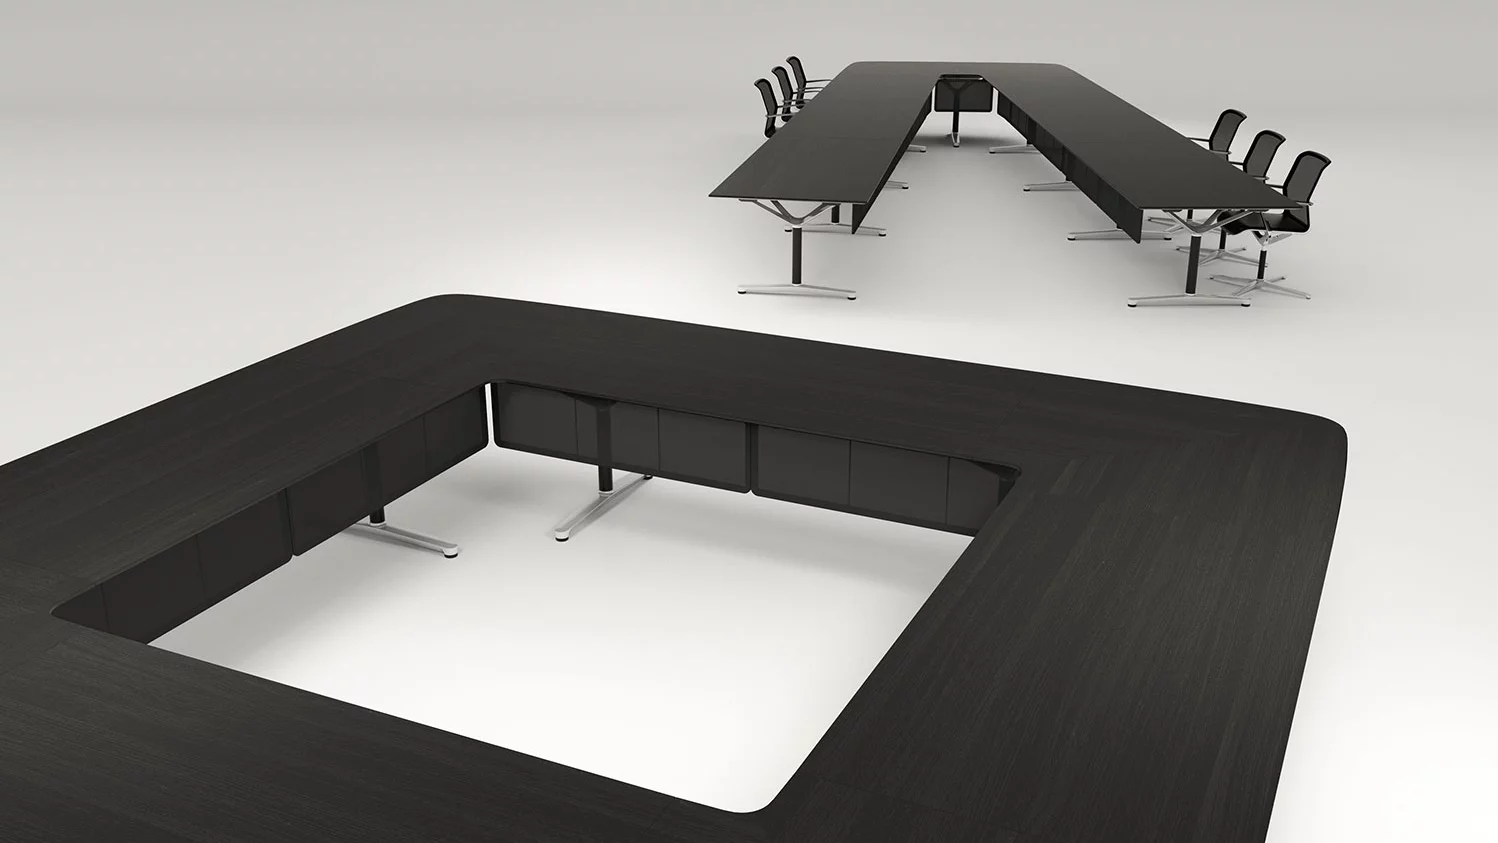 FILO Conference, Premium Seating height Meeting table, Bene Office furniture, Image 2